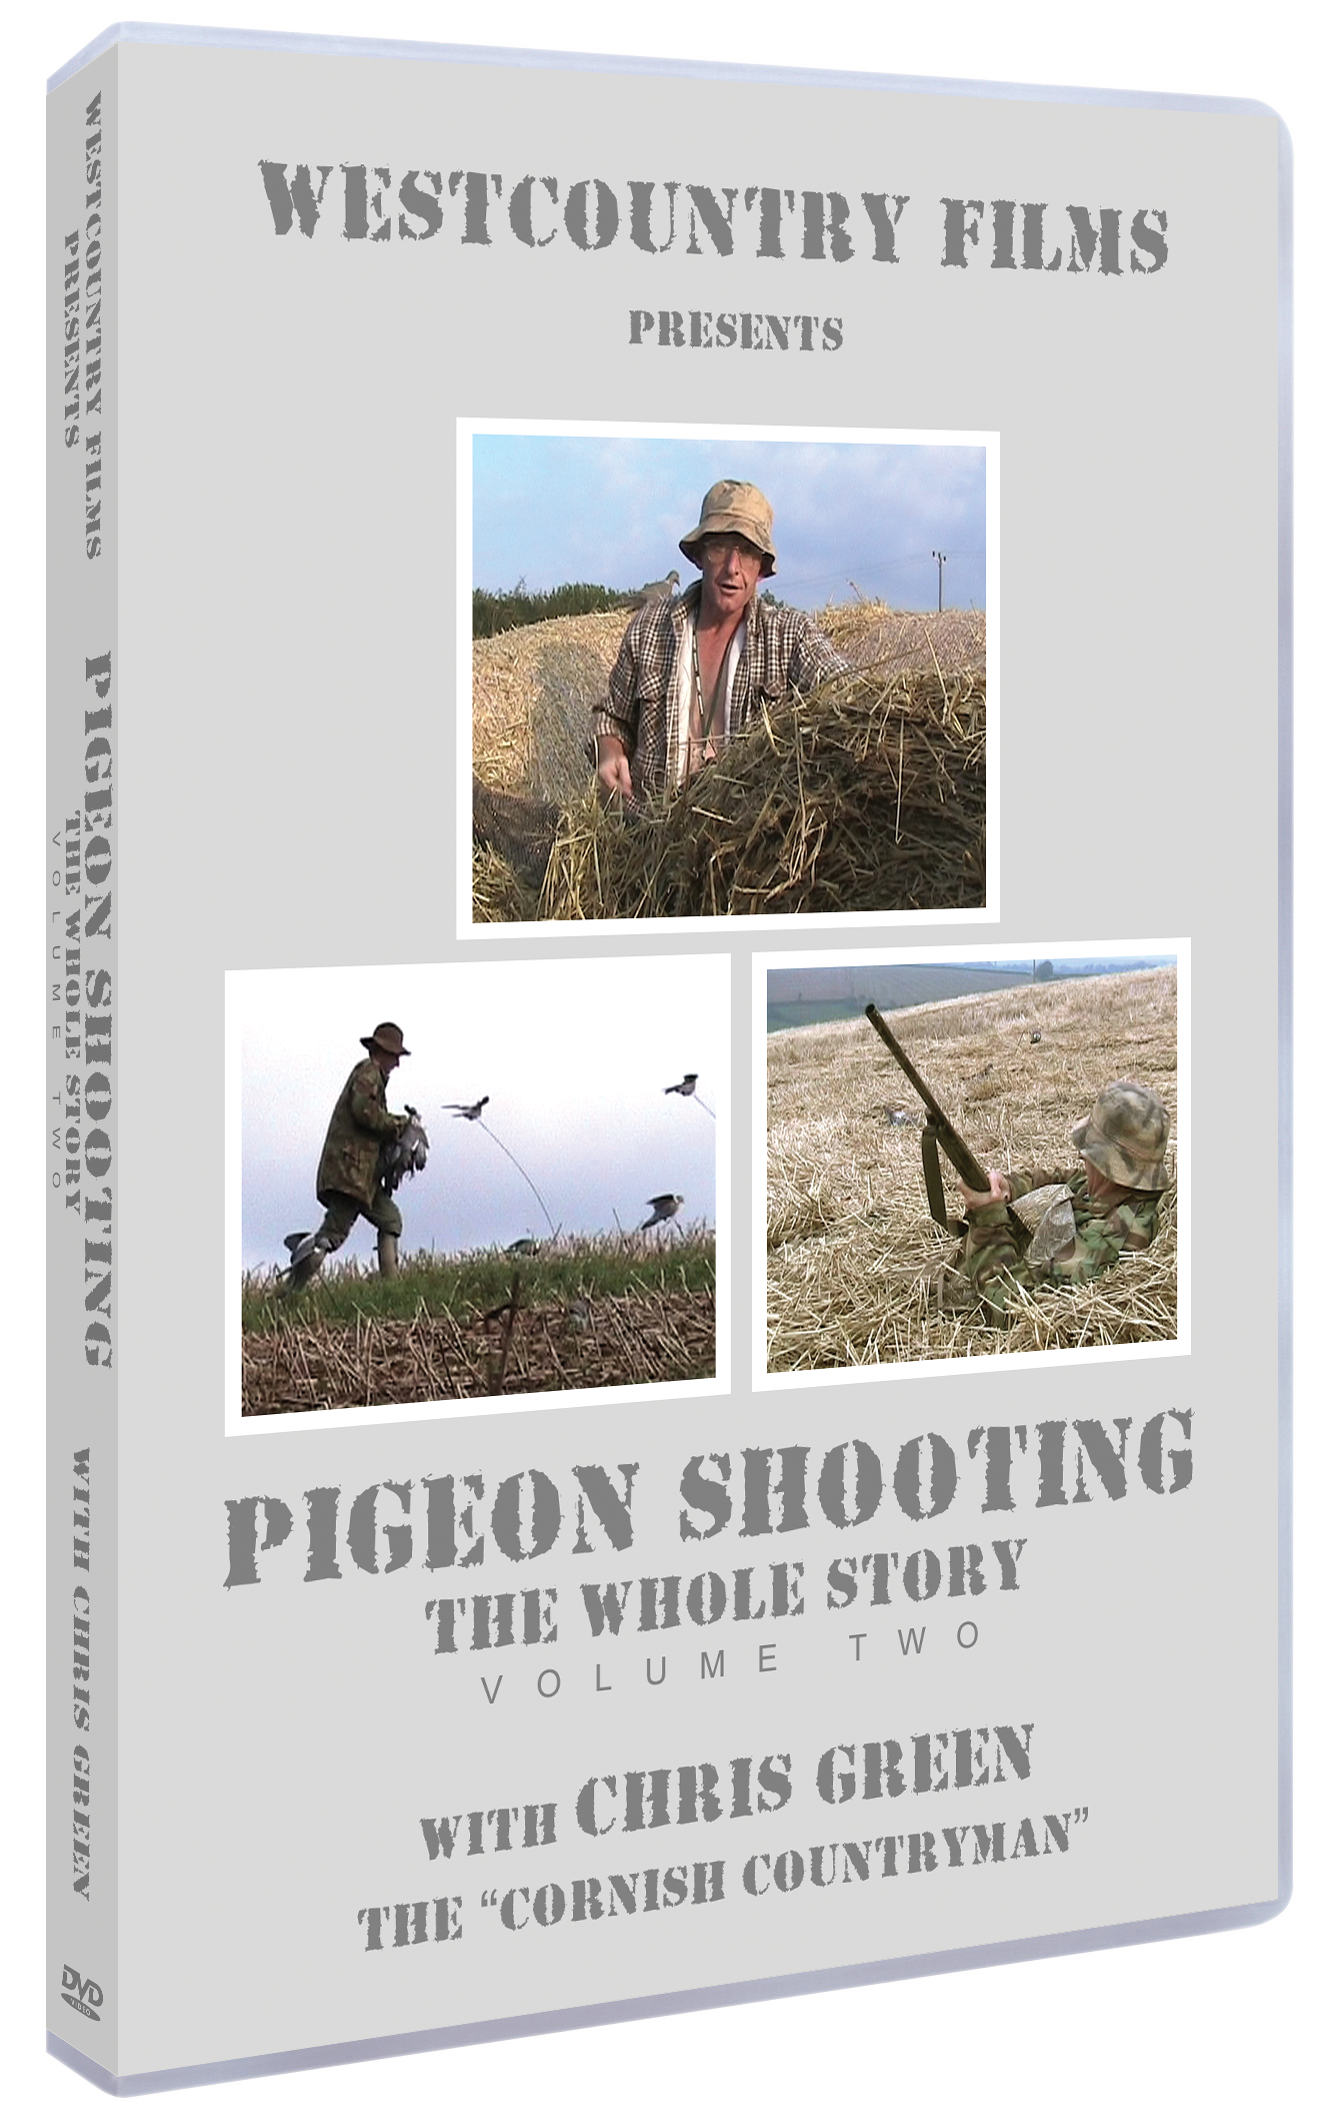 Pigeon Shooting ‘The Whole Story’ Volume Two